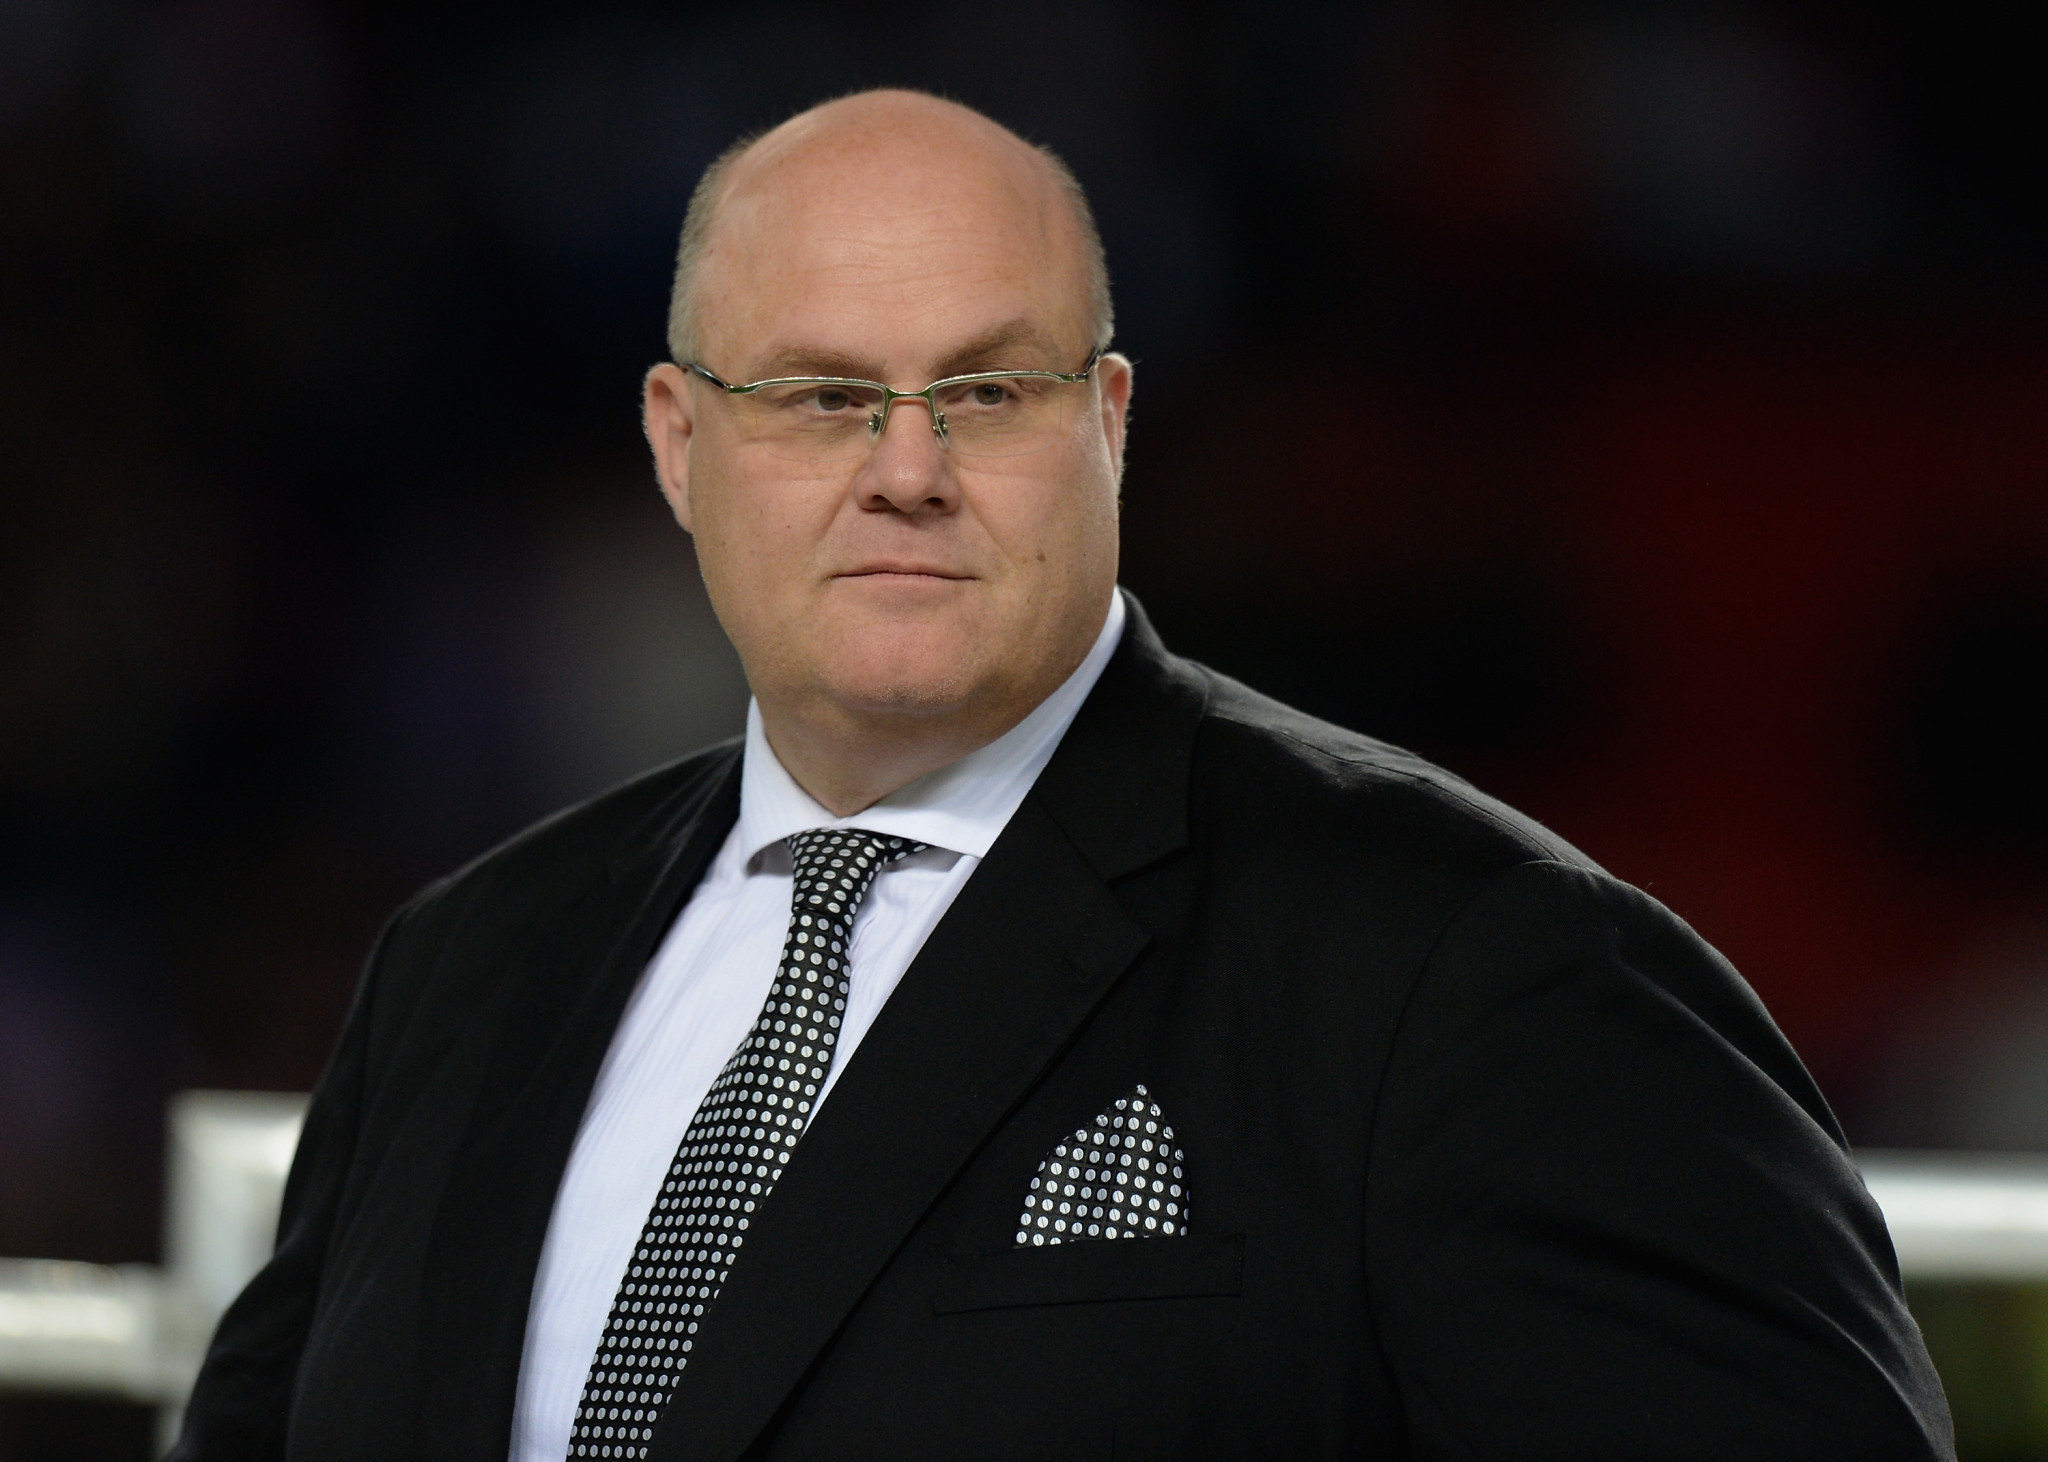 Rugby League International Federation chief executive Nigel Wood has sent condolences on behalf of the governing body to the people affected by last week's terrorist attack in Christchurch ©Getty Images